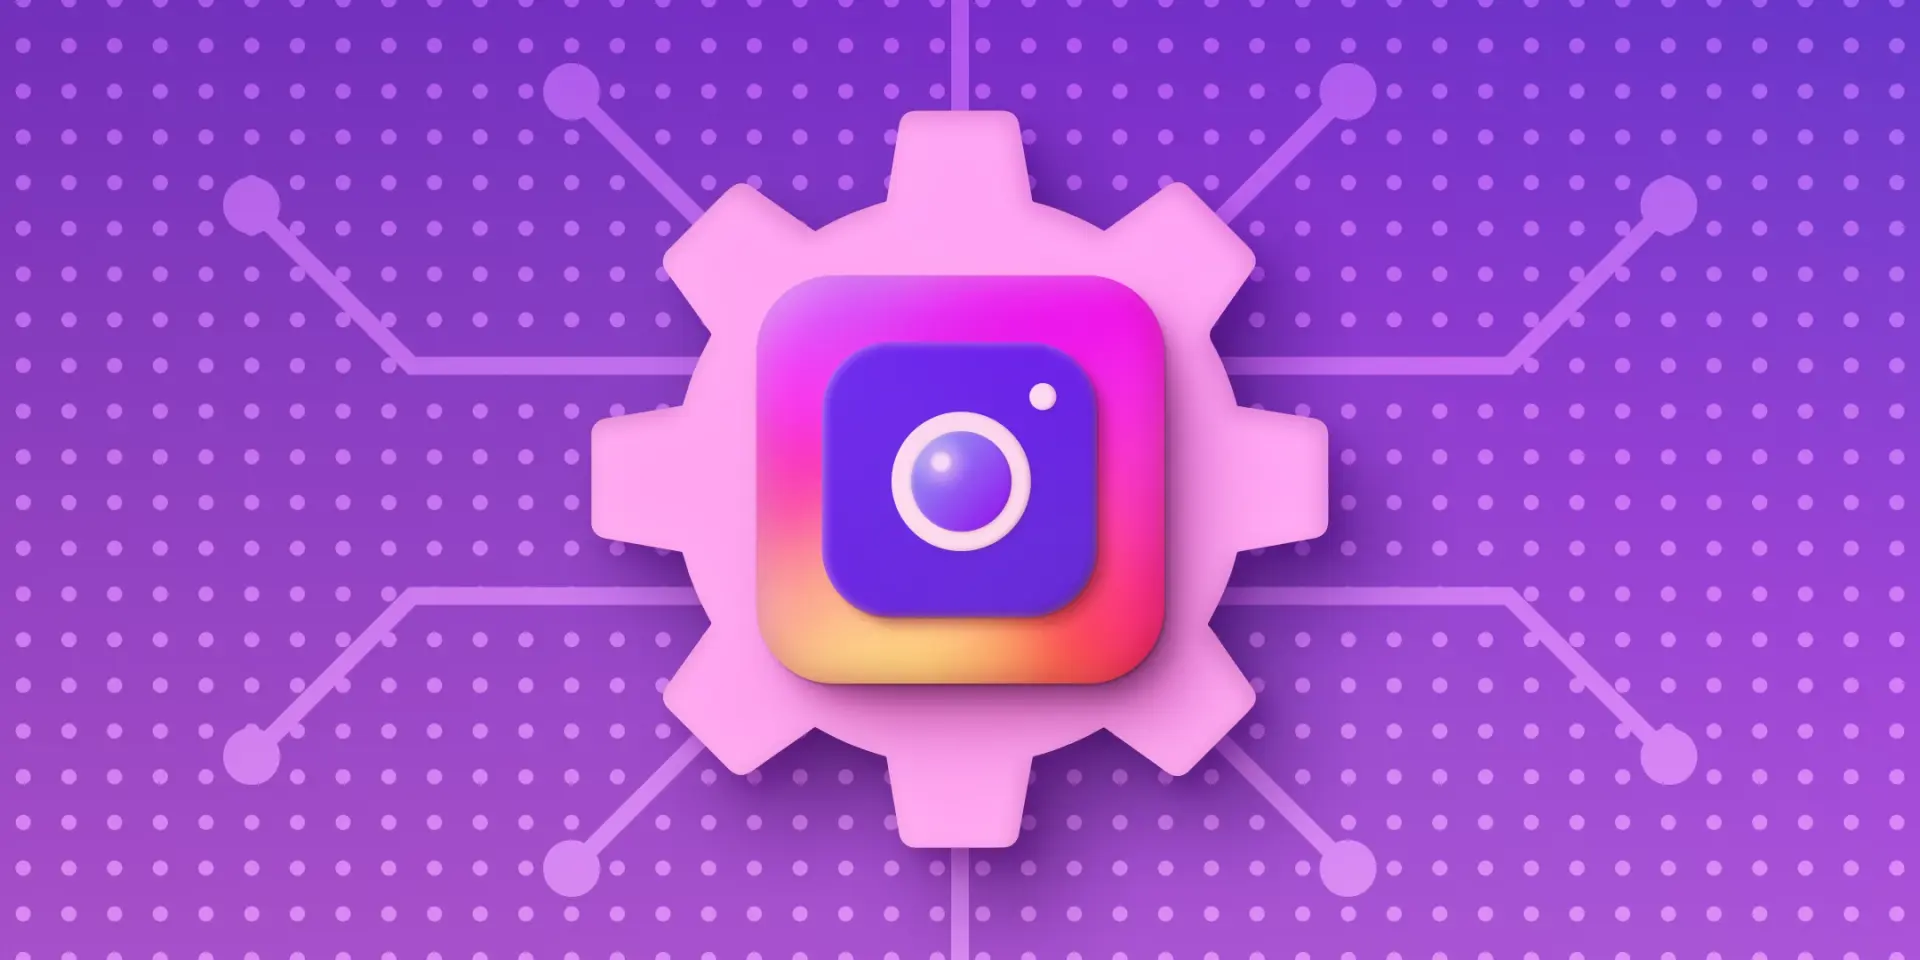 An Instagram icon with a purple gear behind it on a technological purple background